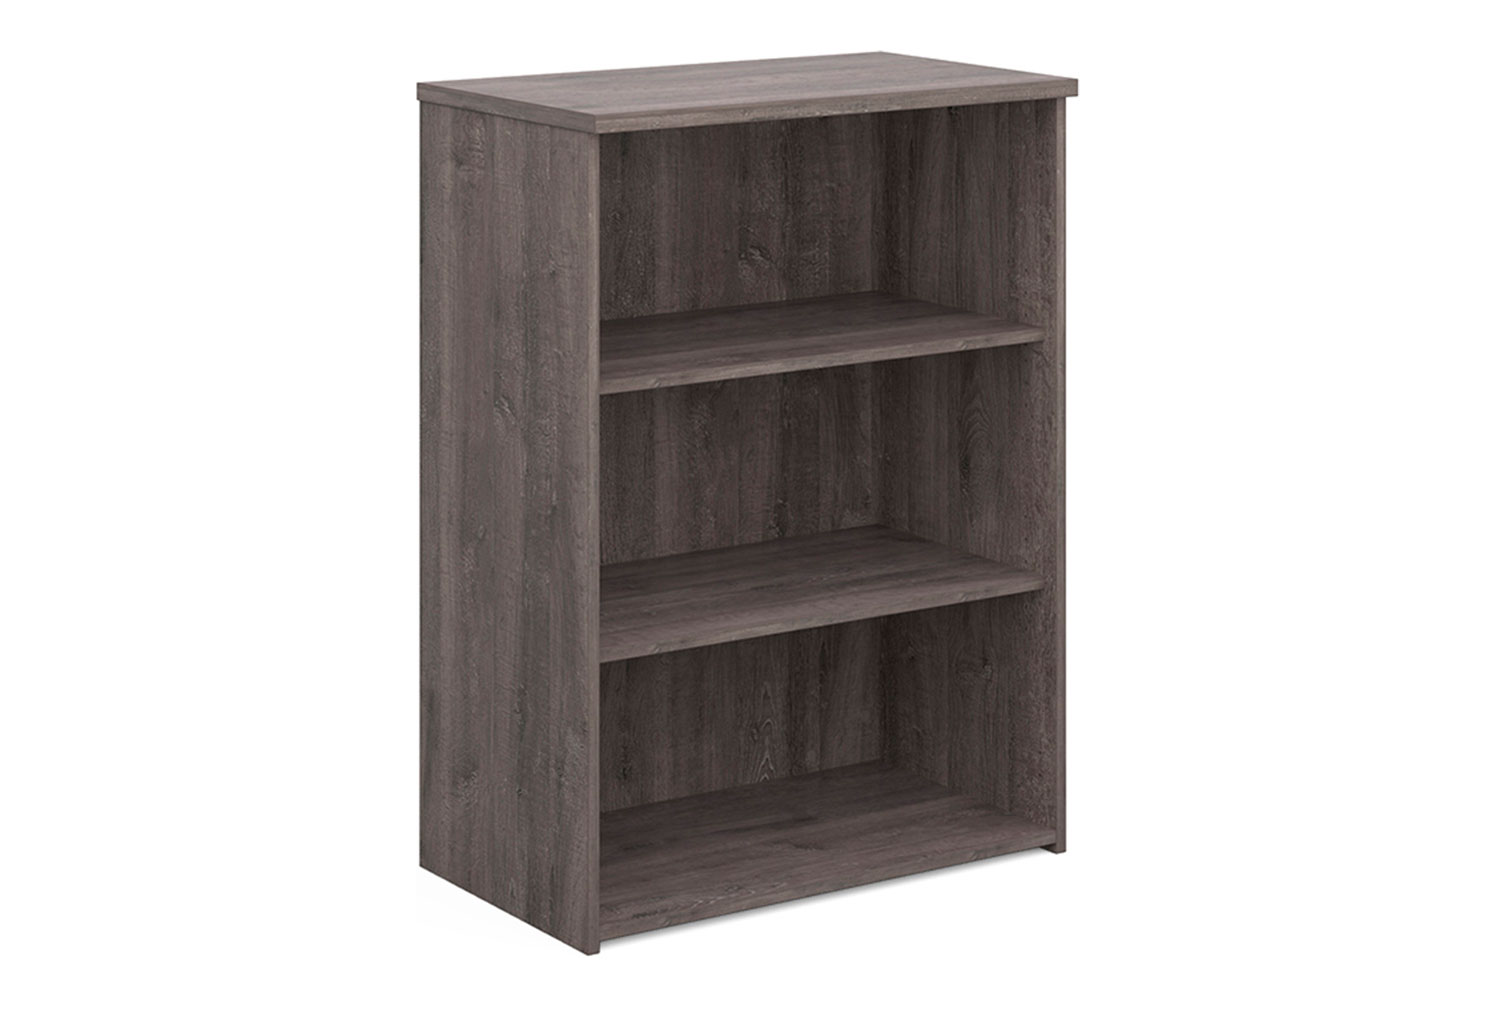 Tully Office Bookcases, 2 Shelf - 80wx47dx109h (cm), Grey Oak, Express Delivery